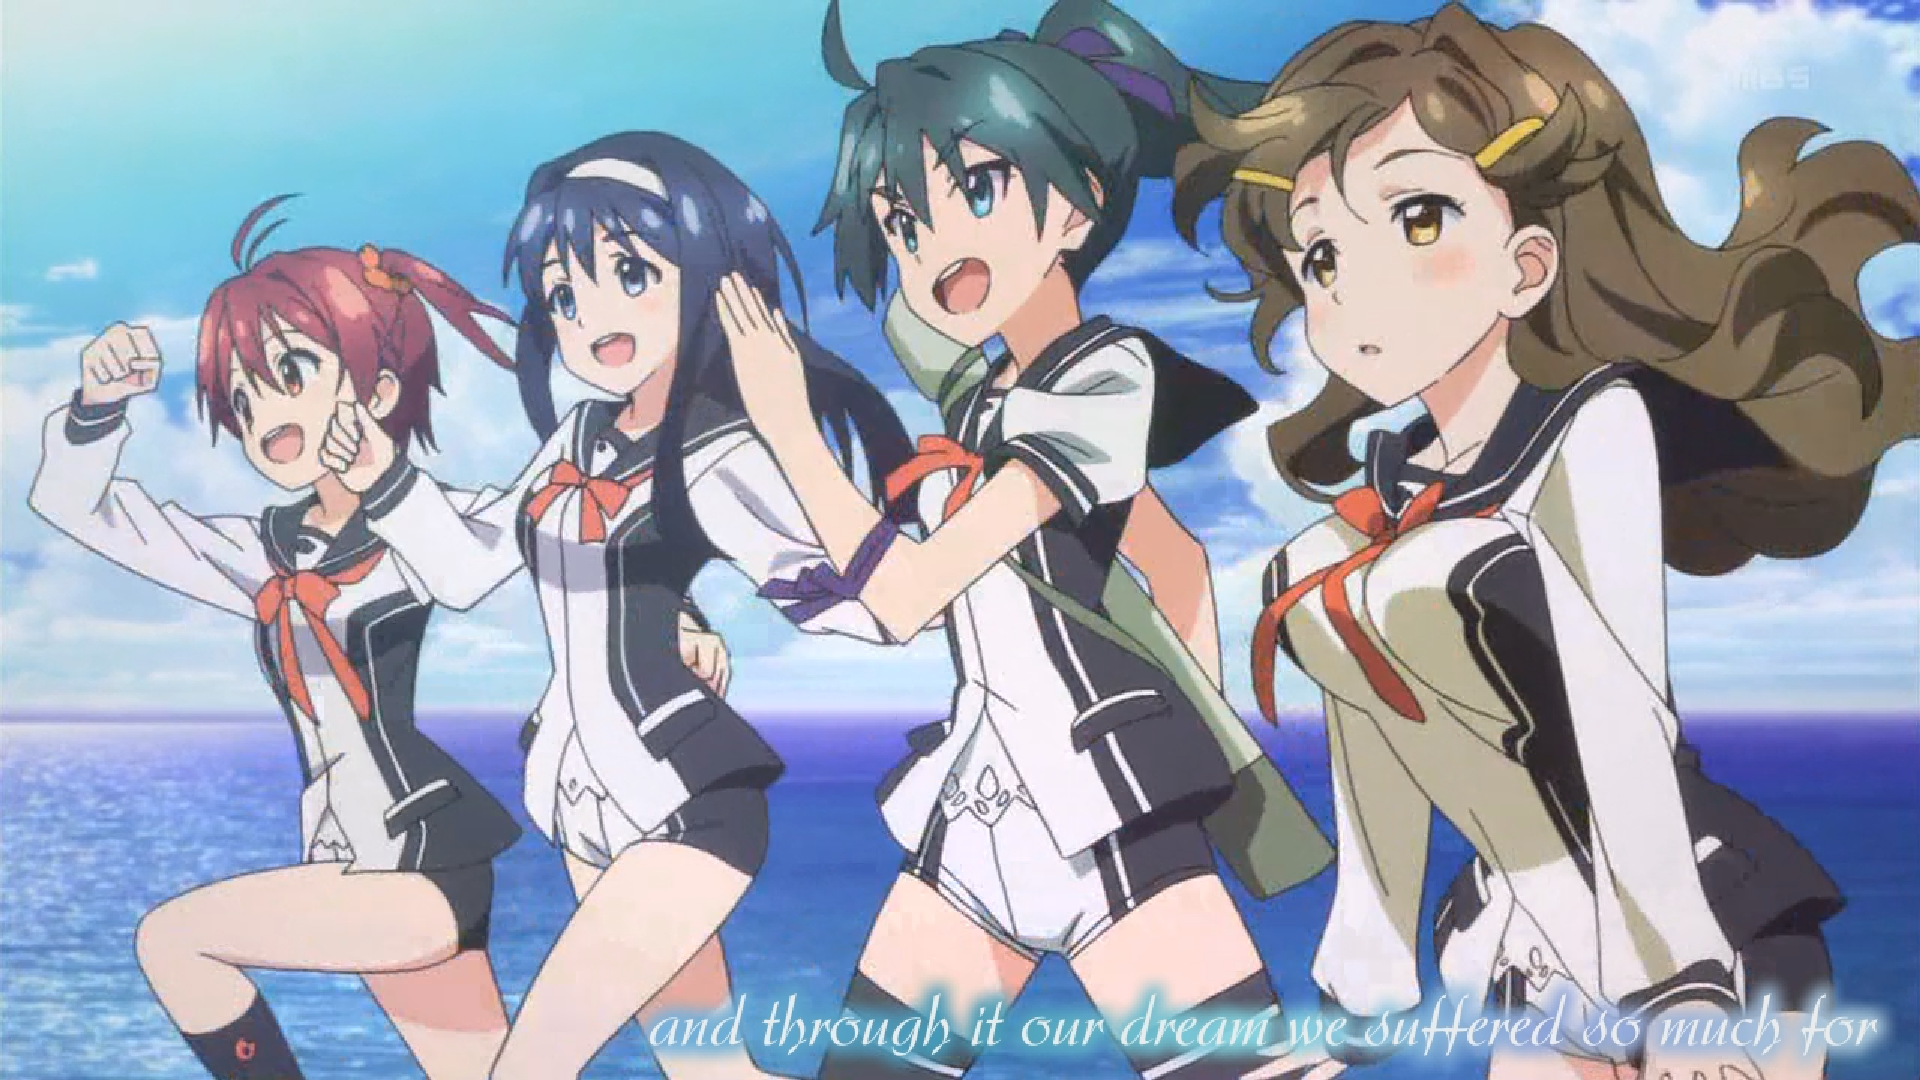 Vividred Operation Ep 1 & 2 Thoughts.